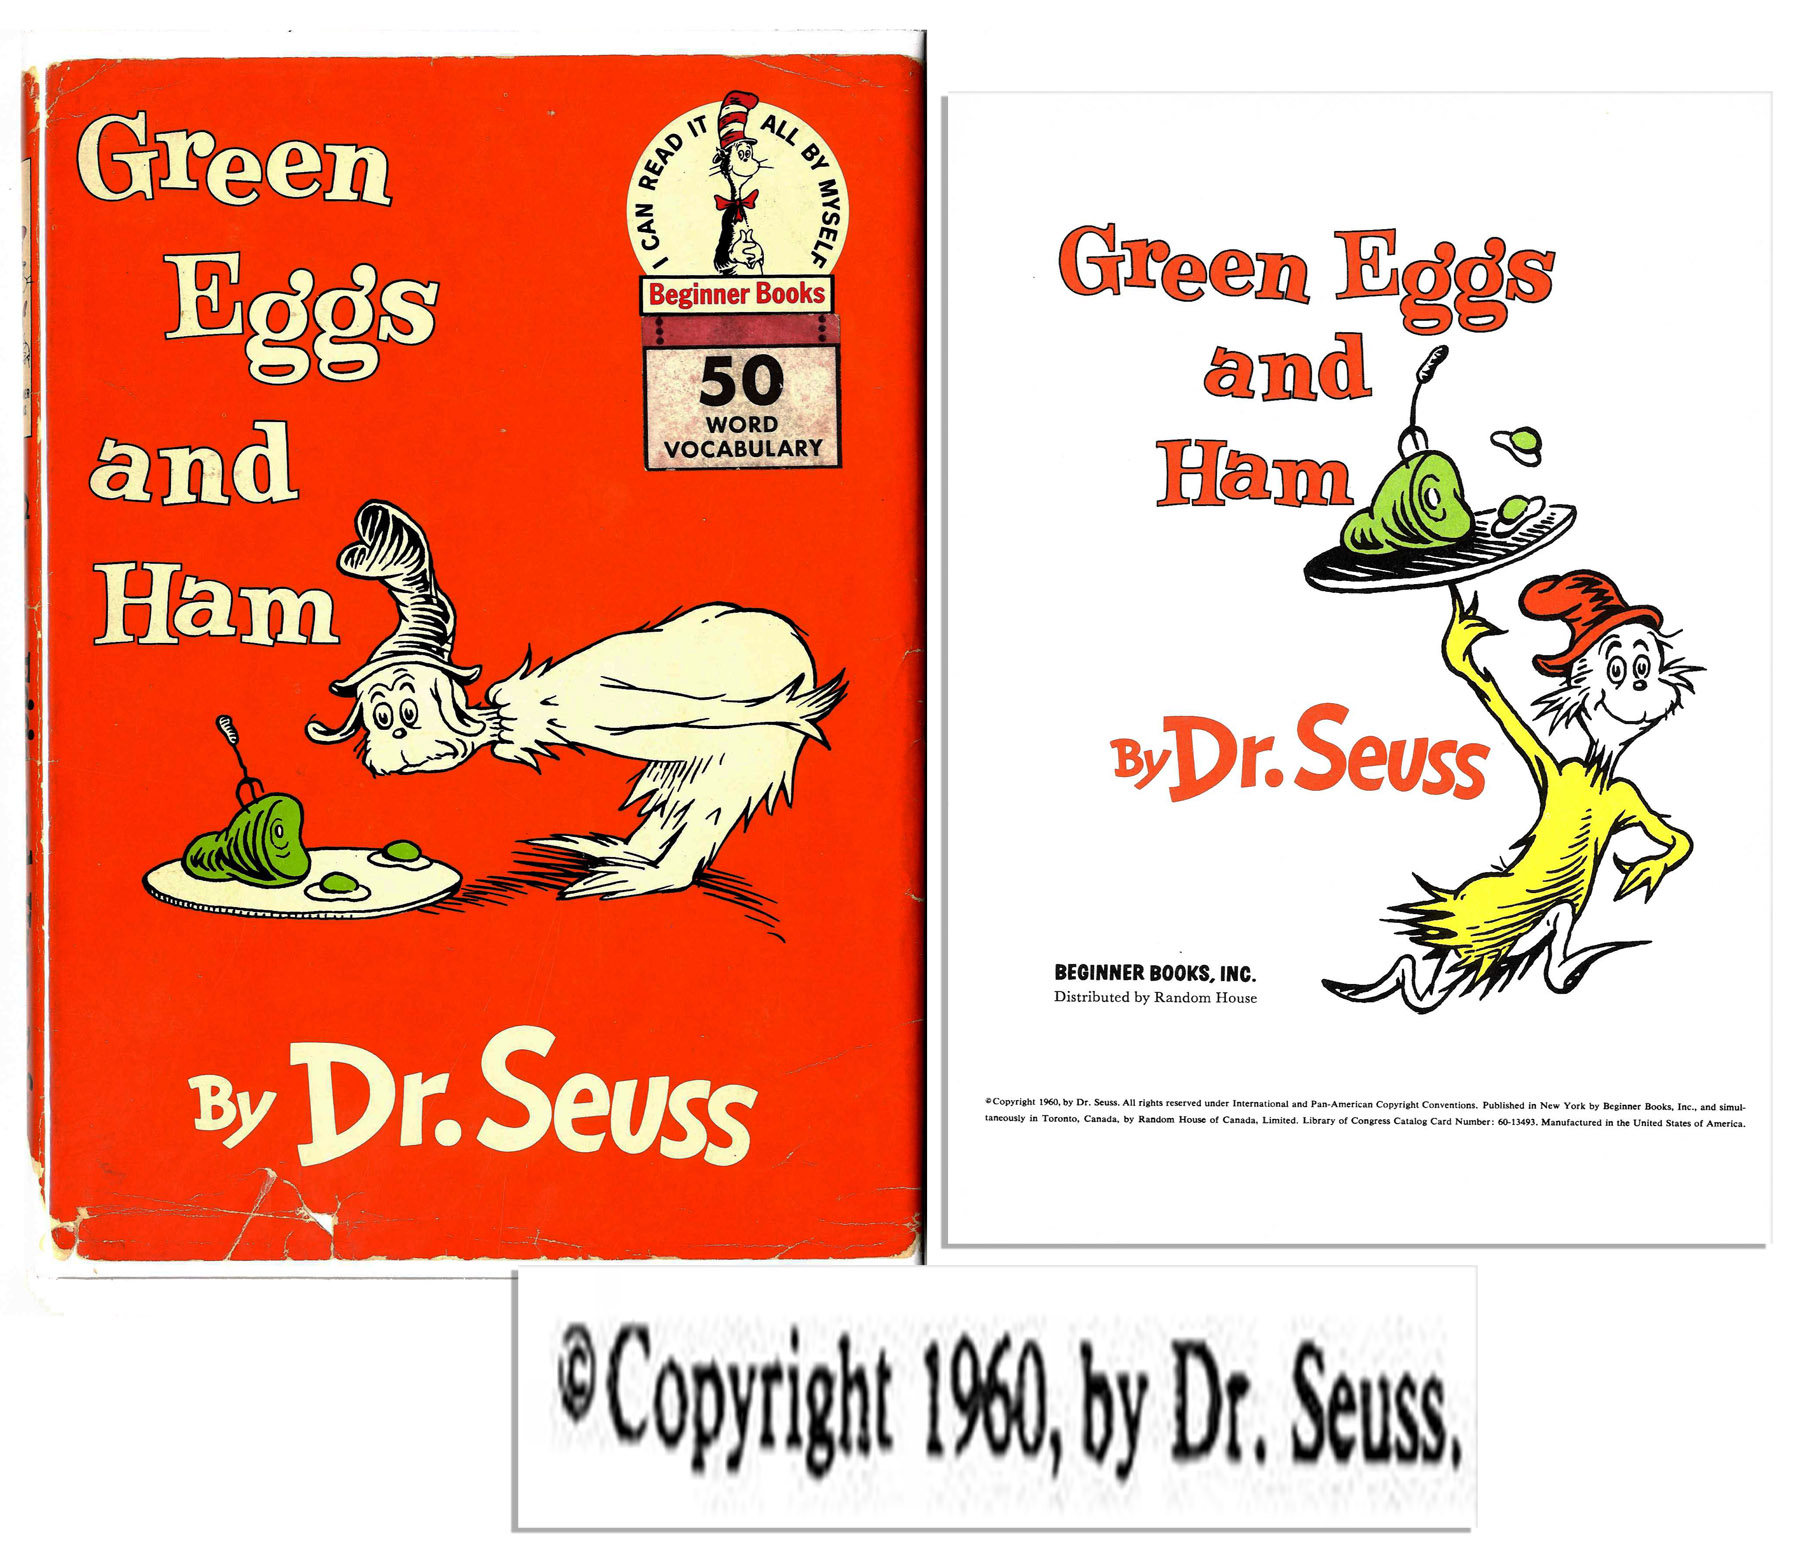 green eggs and ham by dr seuss